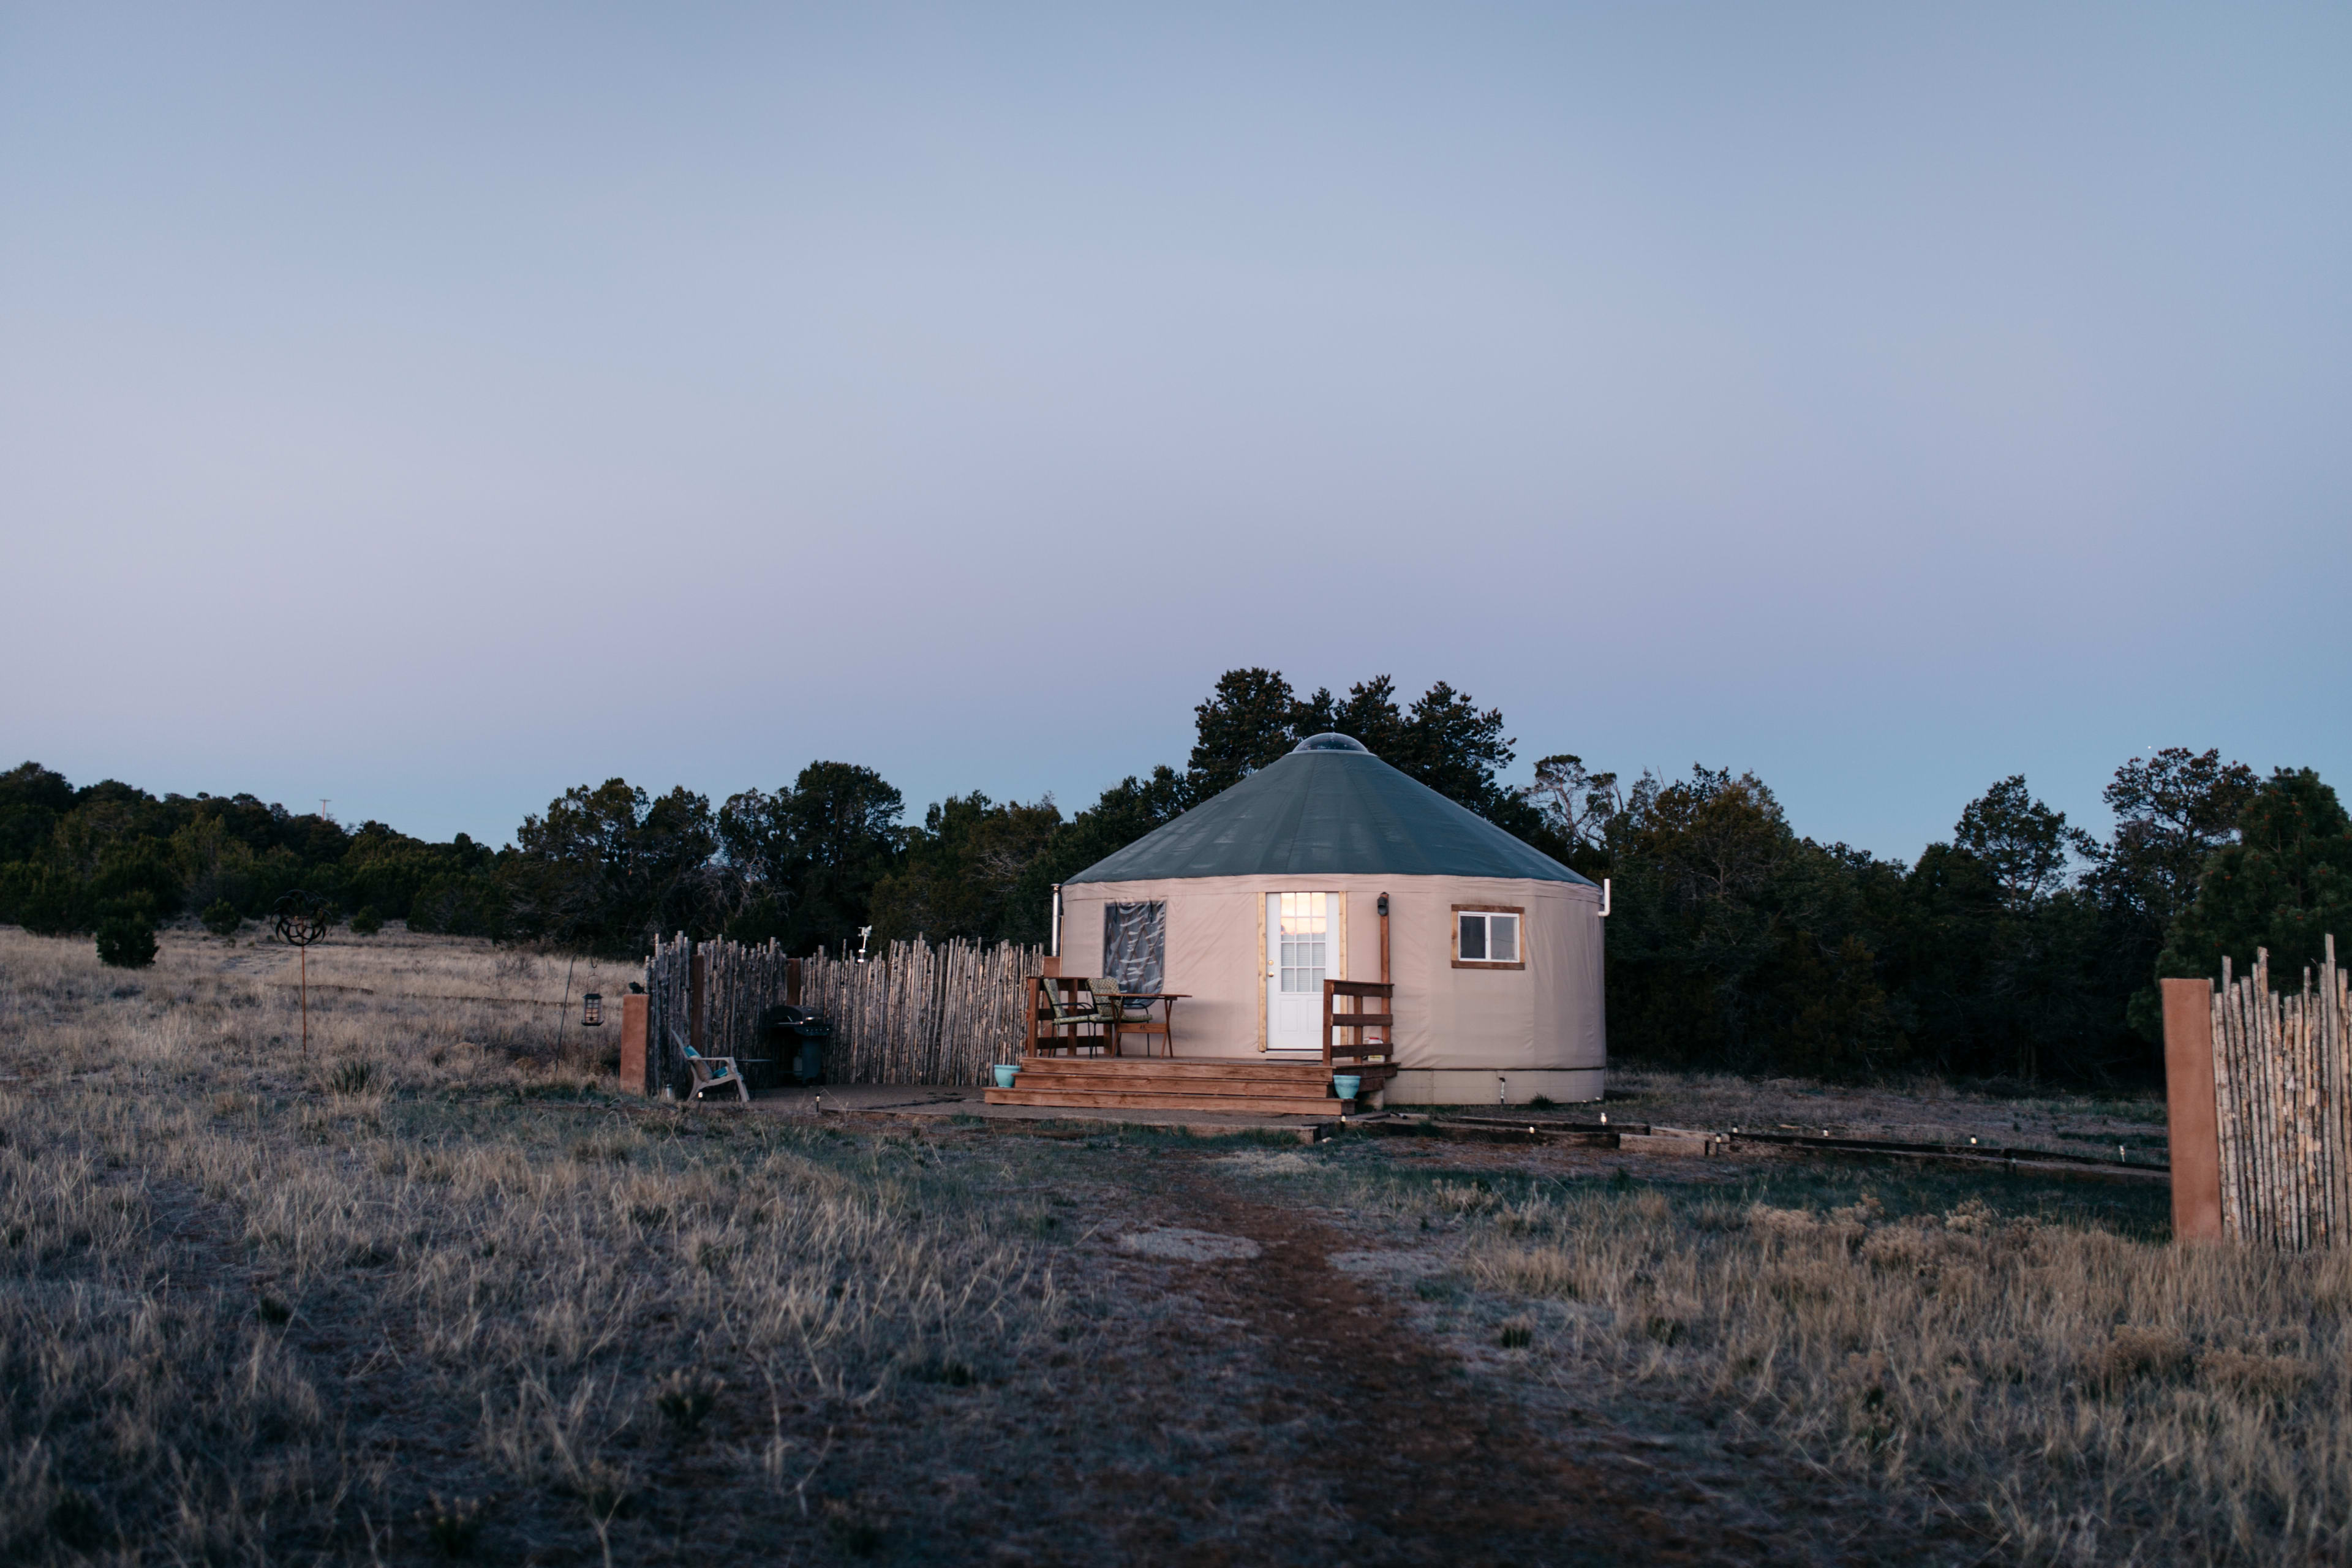 Yurt at sunrise. Waking up just before sunrise is a must while staying at this yurt. You won't regret it!